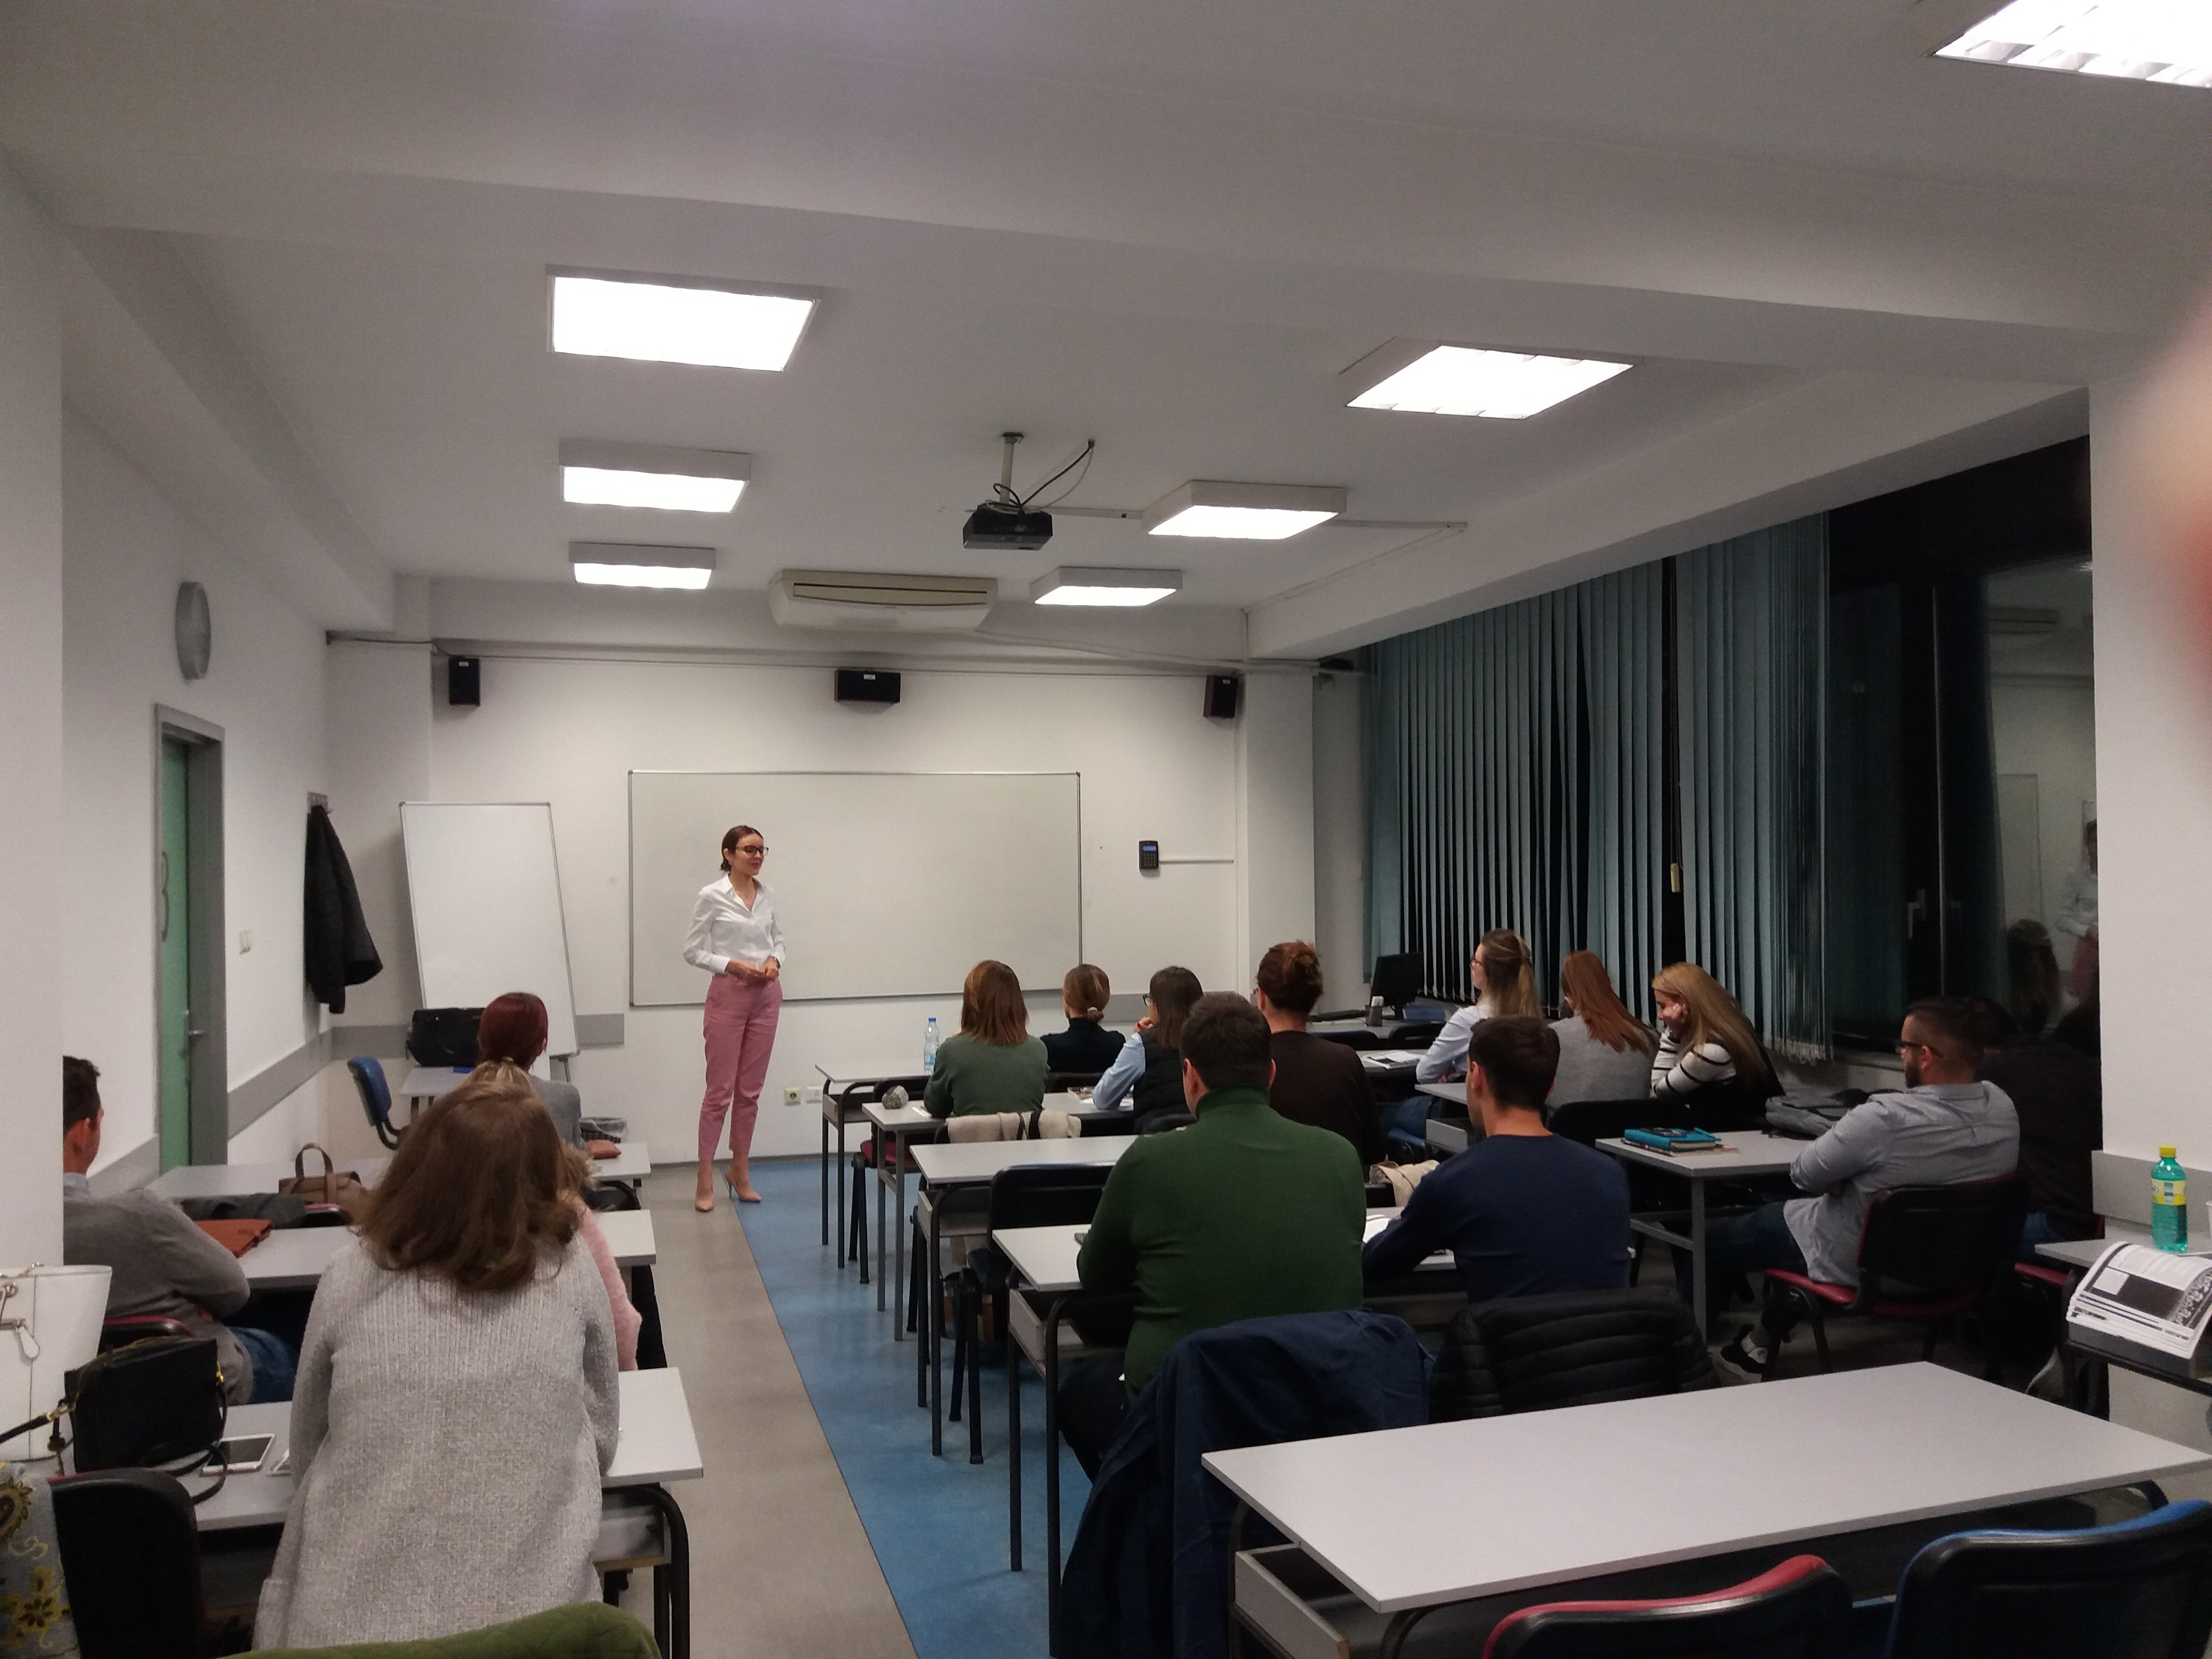 Aneta Naumoska, PhD guest speaker at the School of Foreign Languages